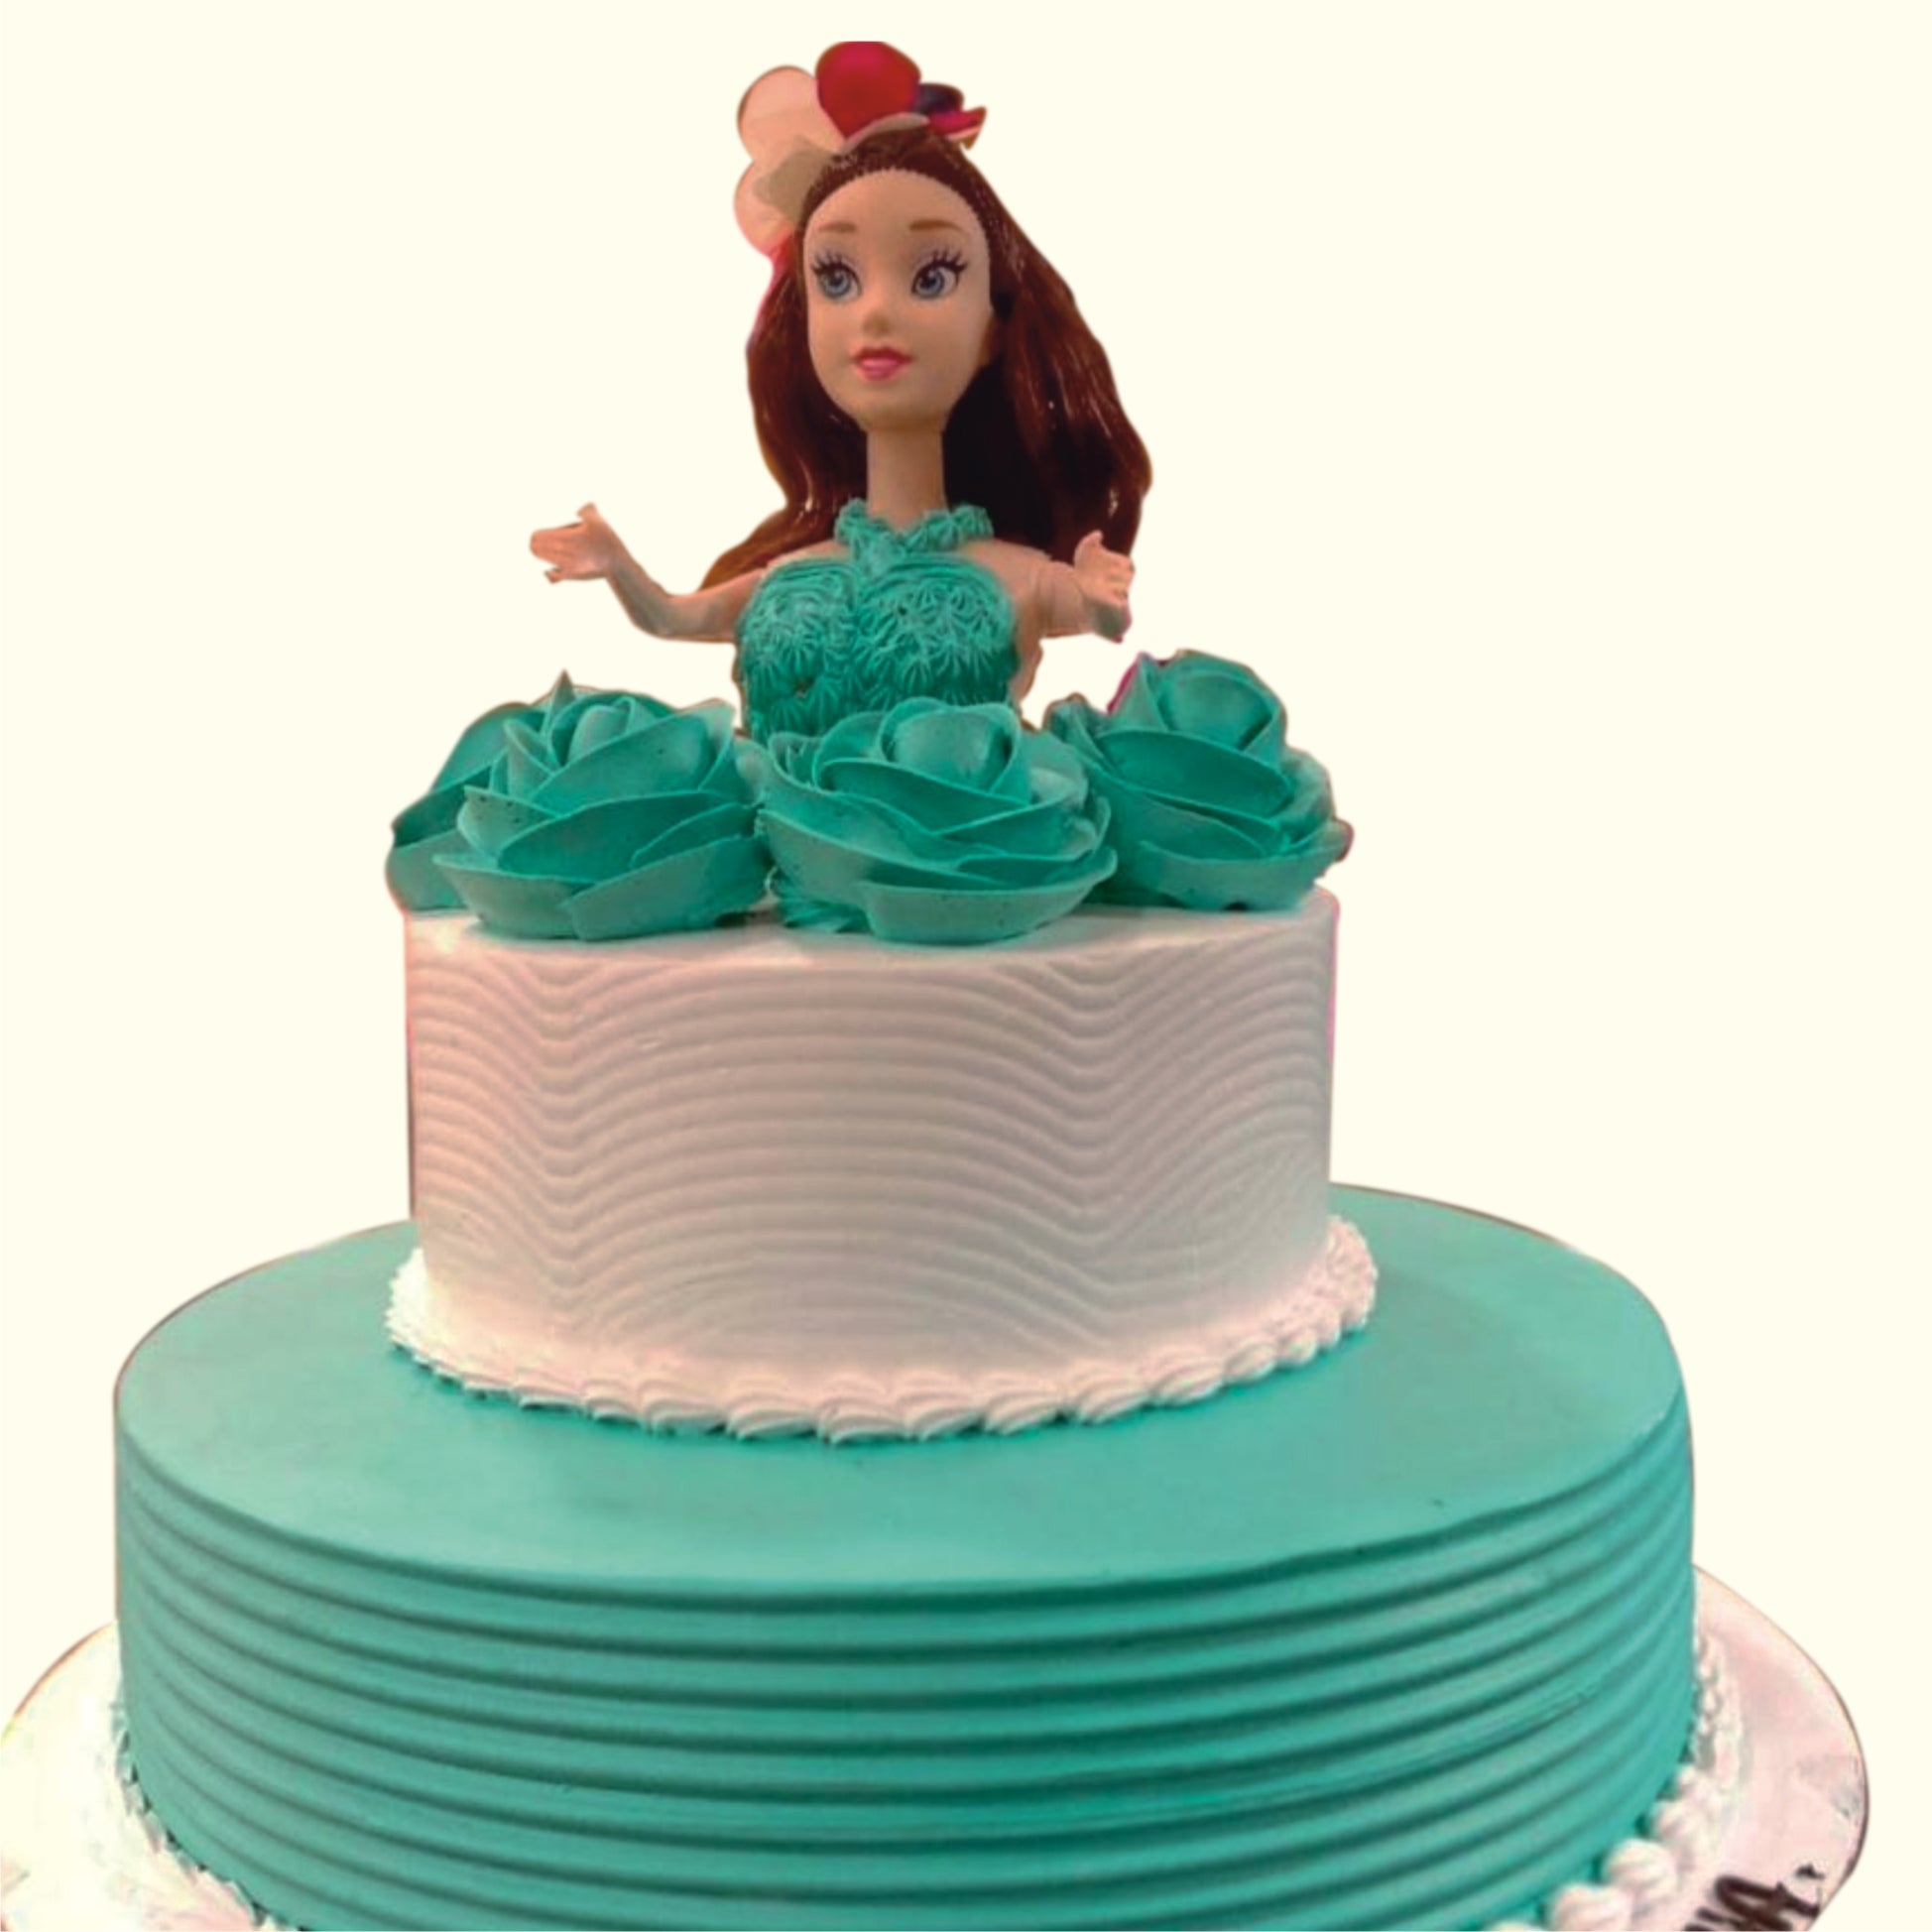 Barbie Doll Cake With 10 Single Layer Cake Base All Bc And Fondant -  CakeCentral.com